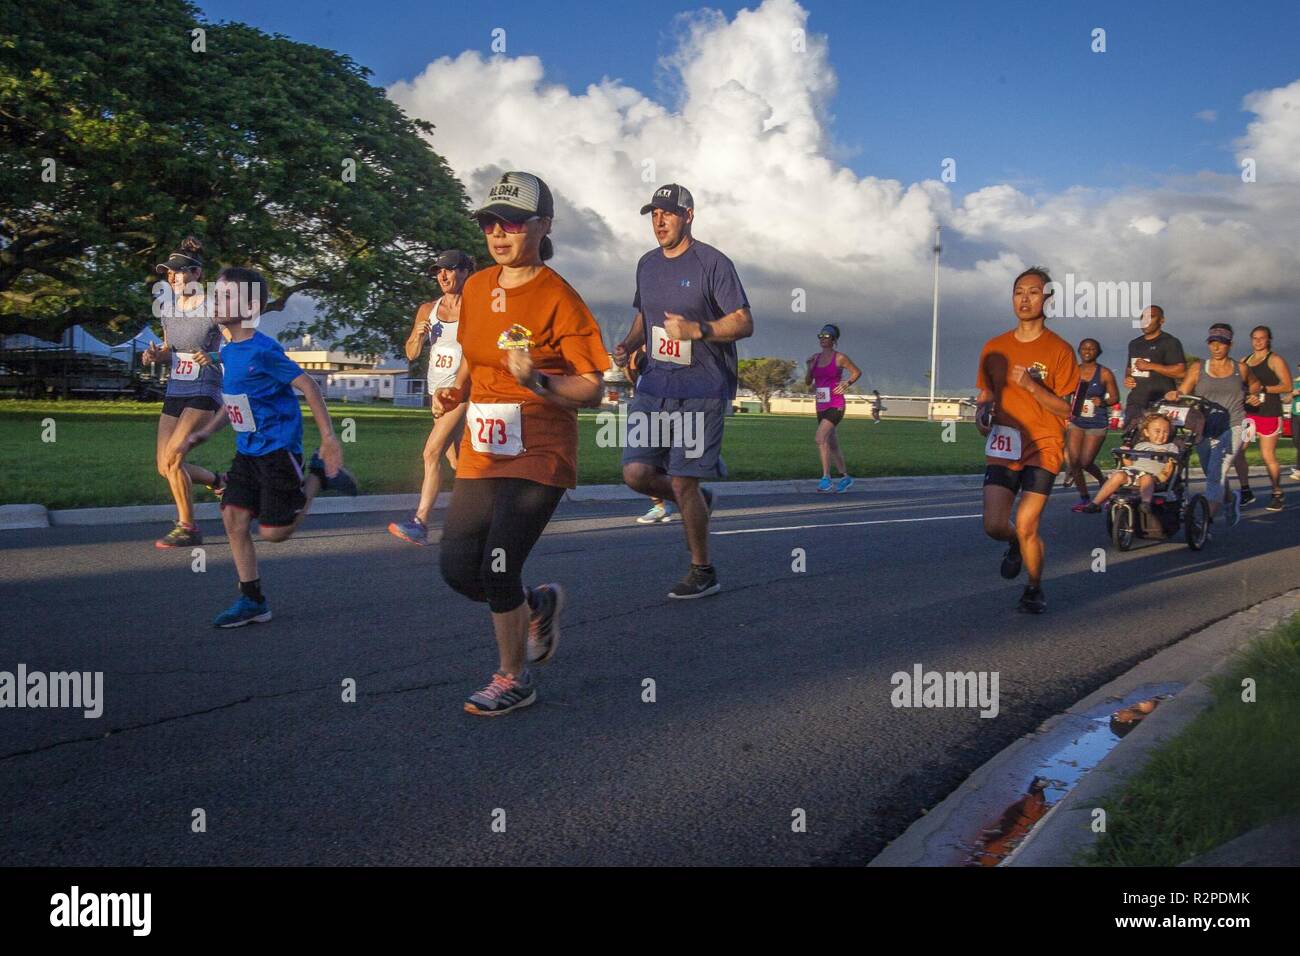 Contestants participate in the Turkey Trot 5k and 10k run, Marine Corps Base Hawaii, Nov. 3, 2018. The event, hosted by 3rd Radio Battalion and Marine Corps Community Services Hawaii, is an annual Thanksgiving-themed event that is open to U.S. Service members, their families, and civilian participants. The event promotes readiness and resiliency across the installation and local community by encouraging healthy, family-oriented activity. Stock Photo